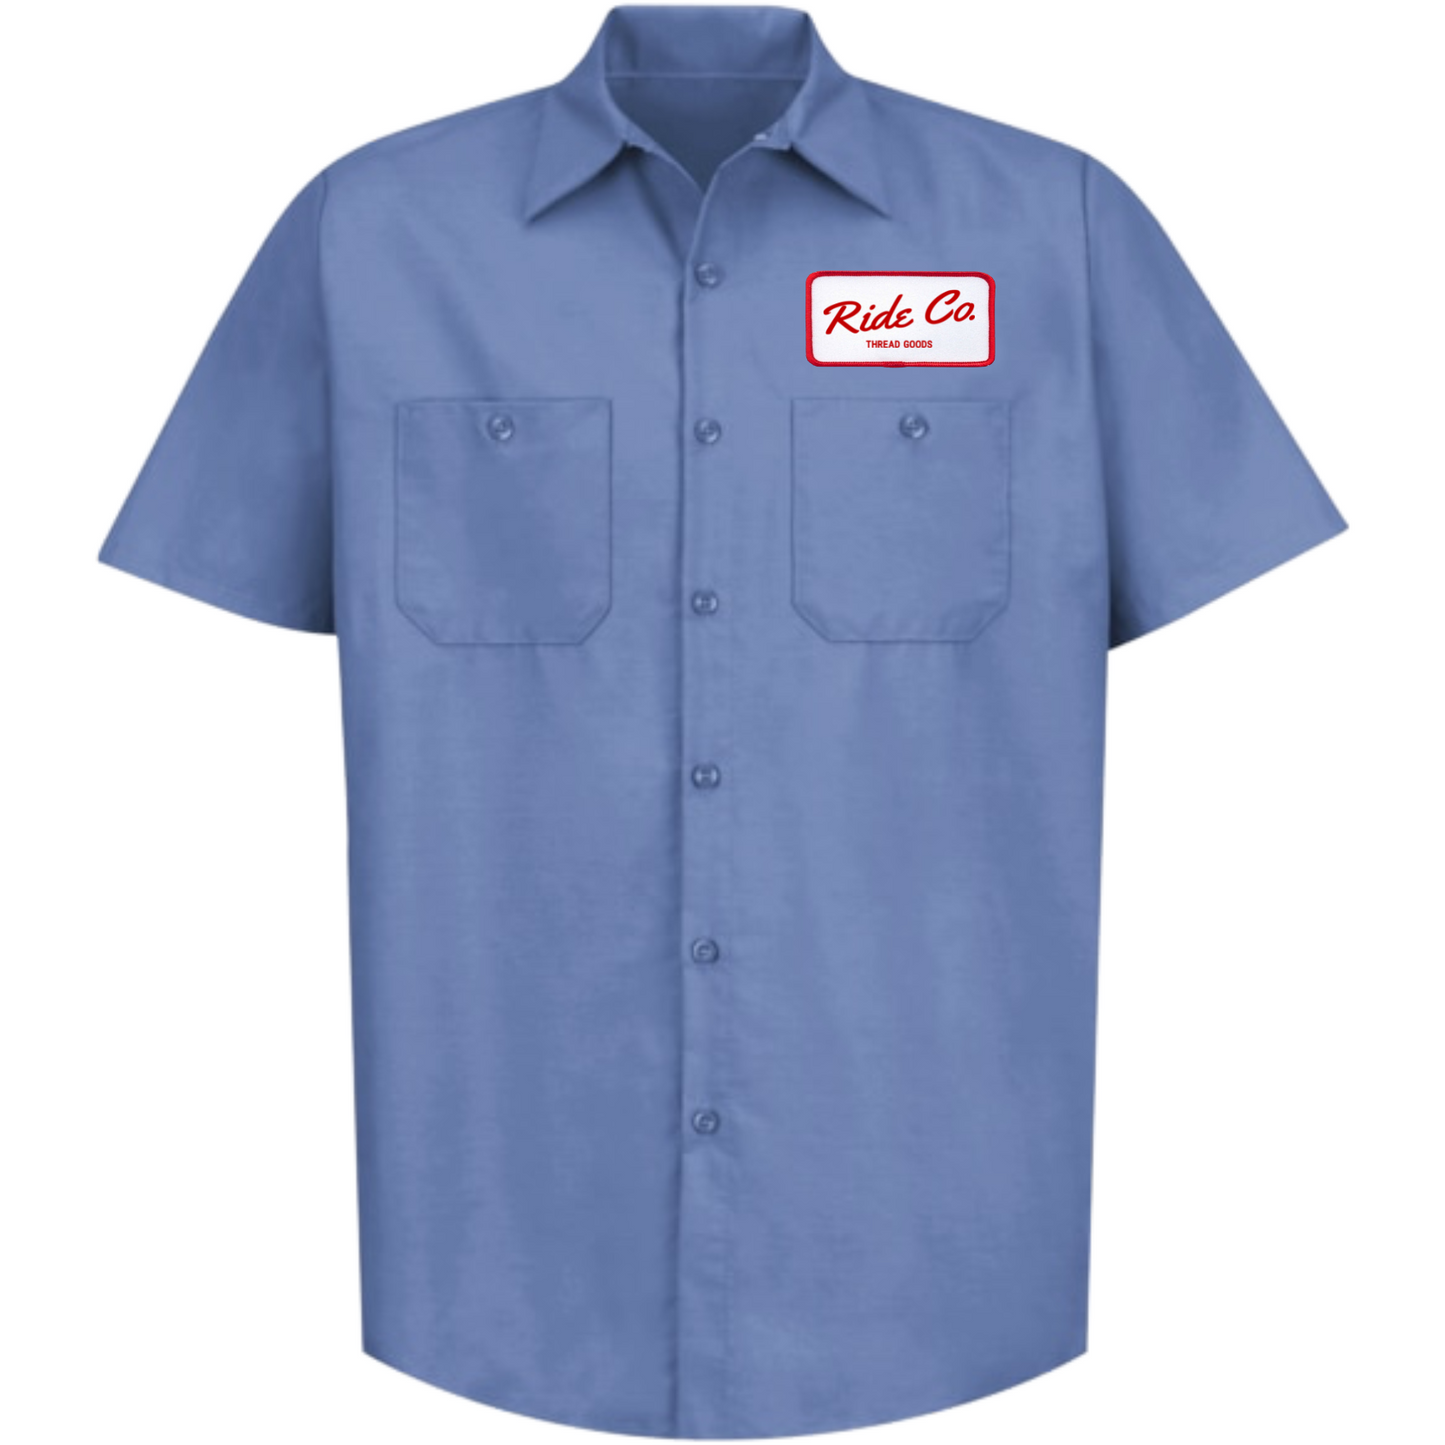 Ride Co. The Work Shirt